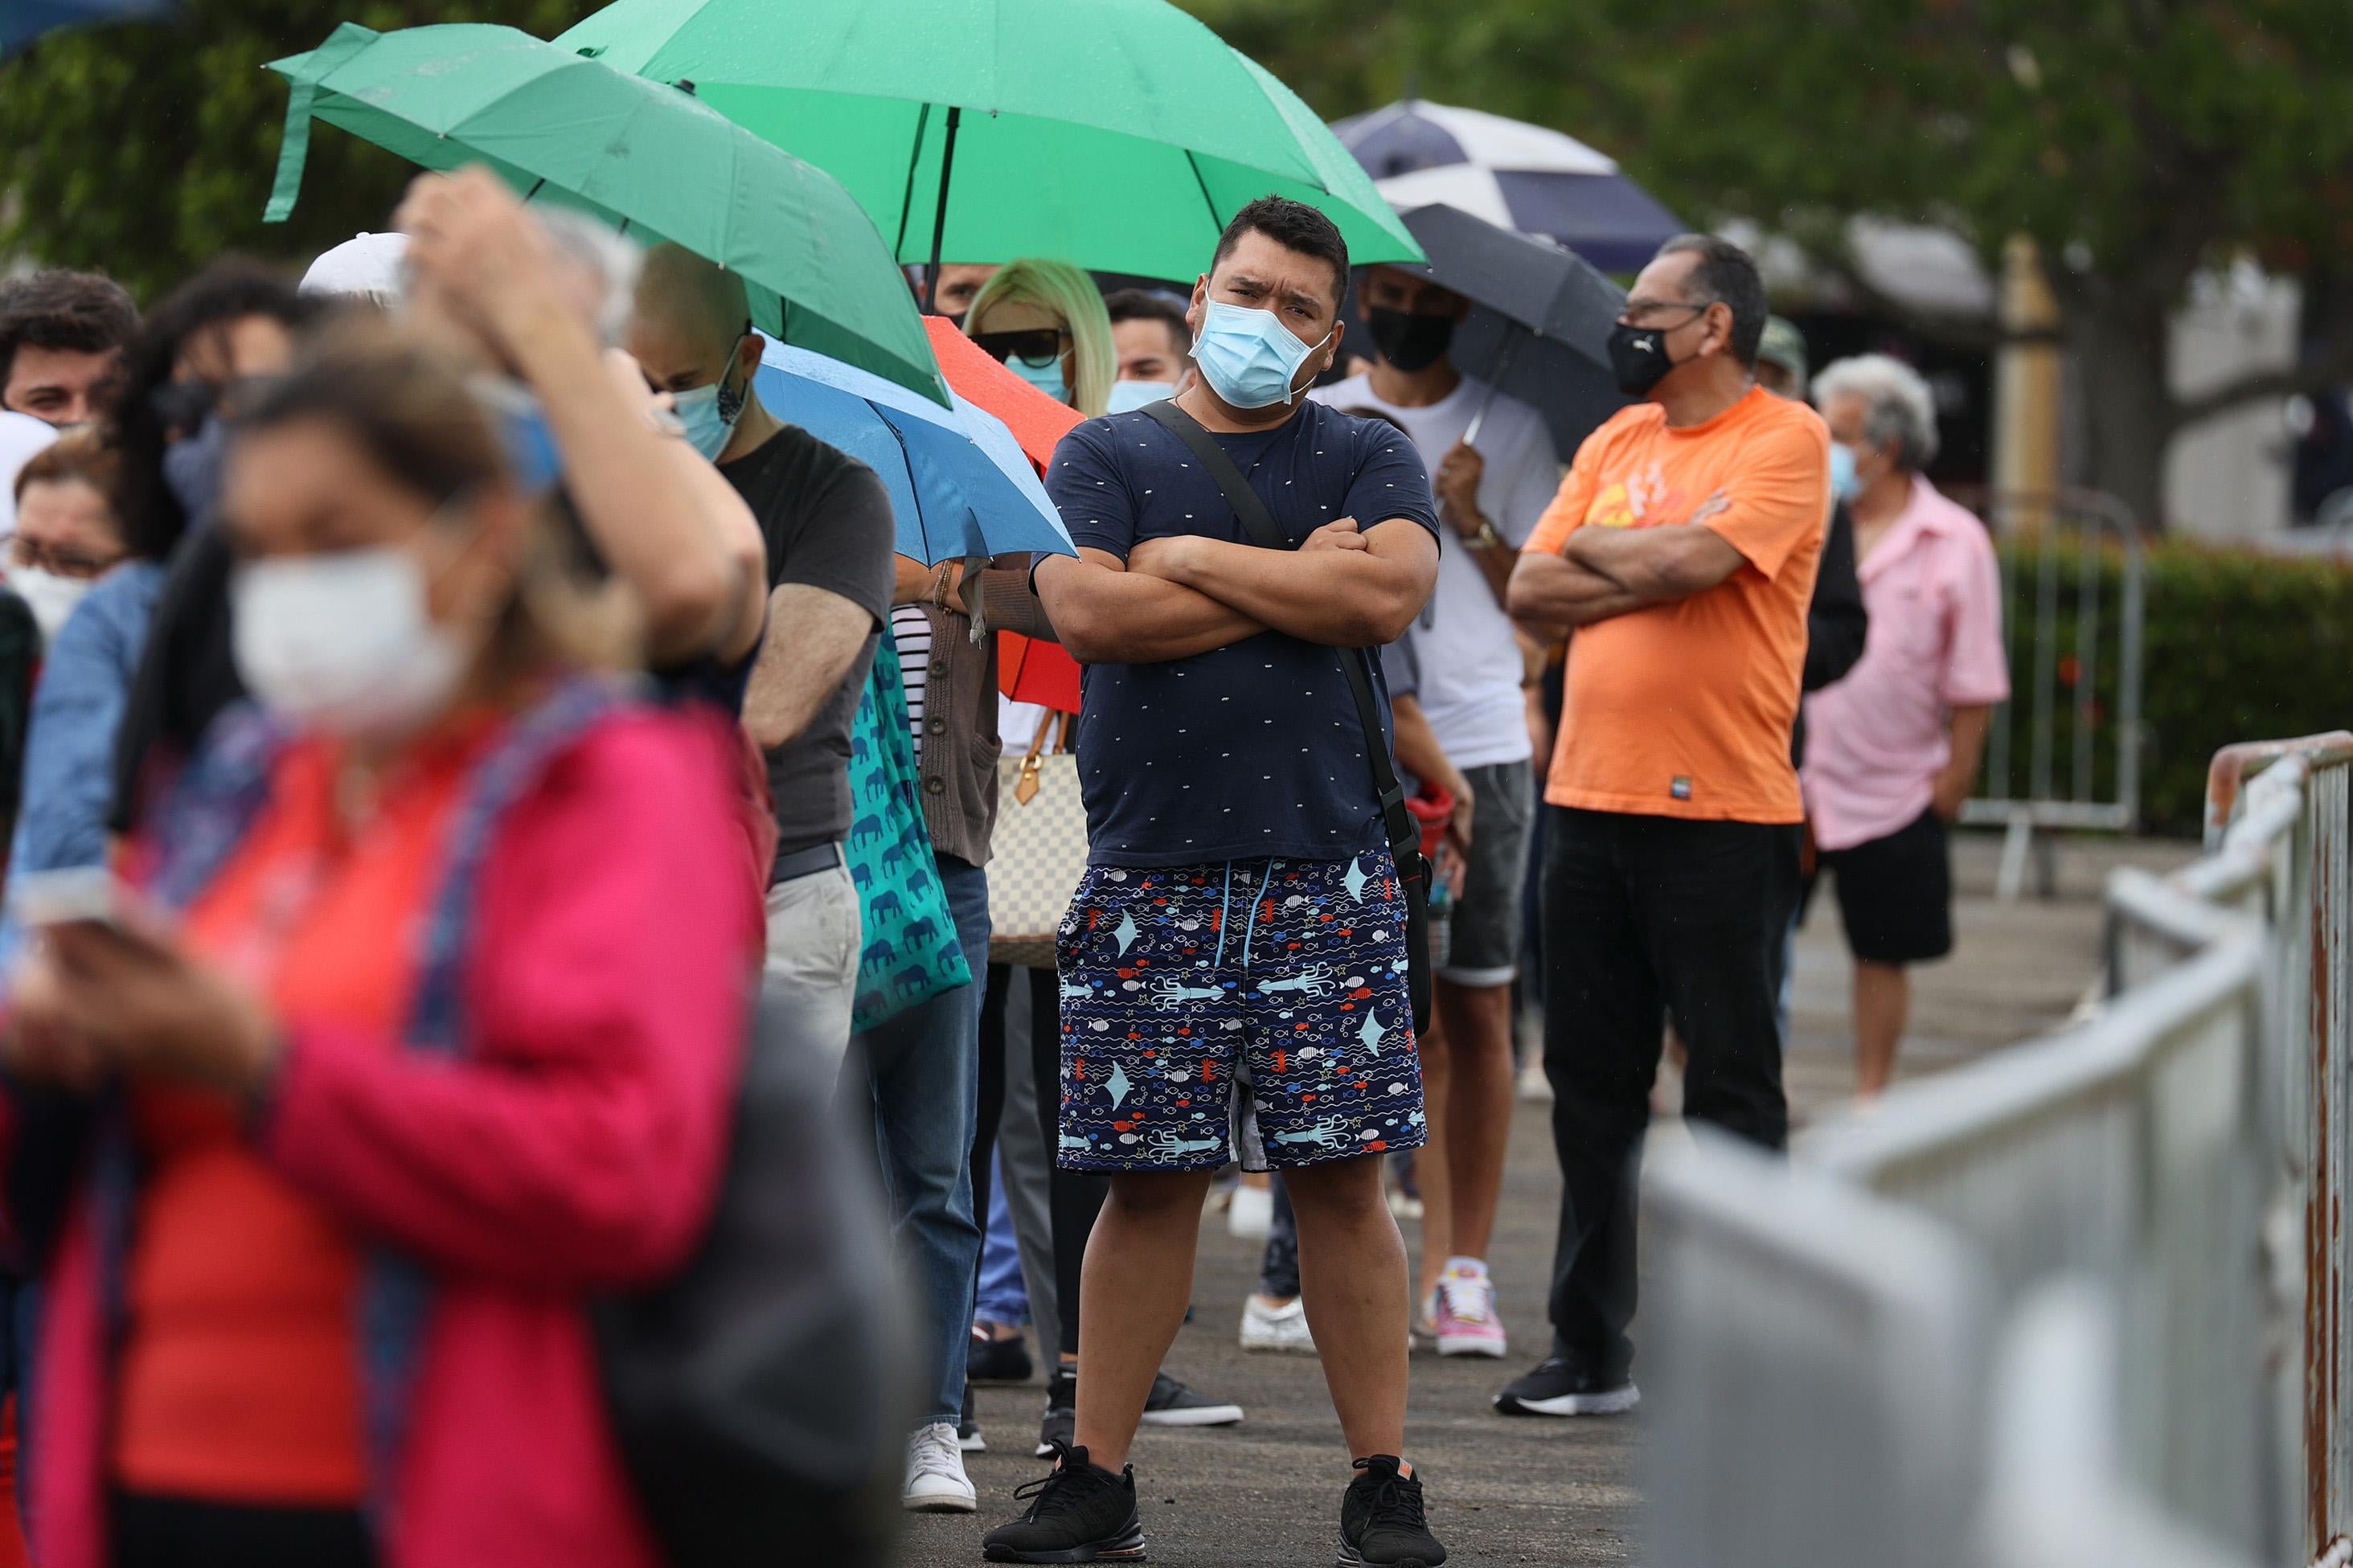 Amid a line of people holding umbrellas while waiting, a man in a mask stands with his arms crossed.